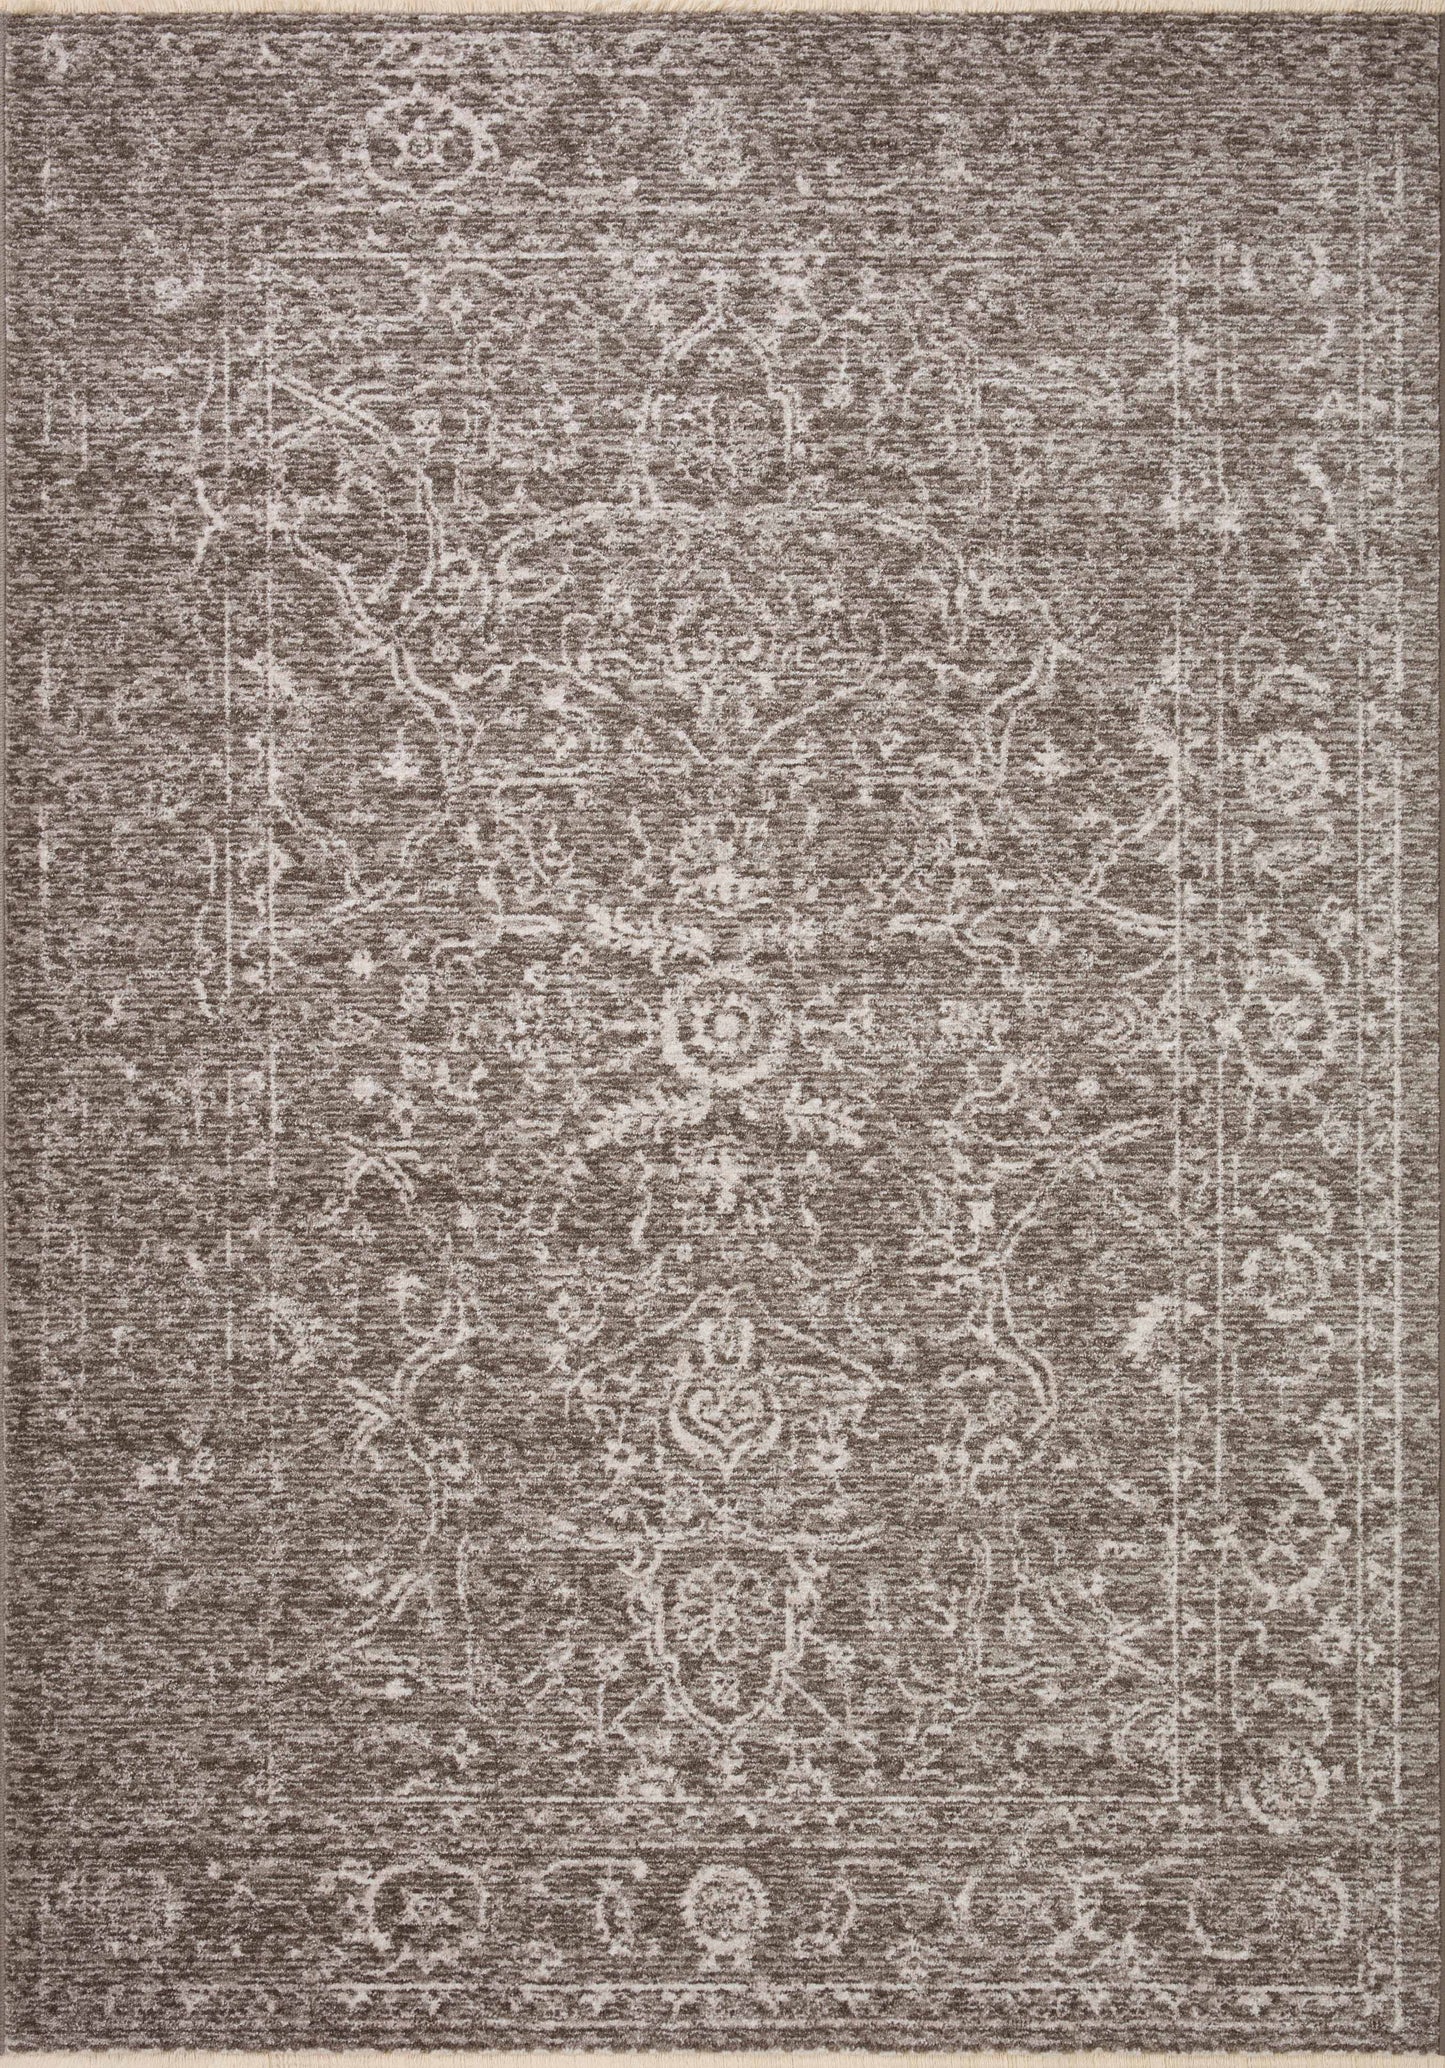 A picture of Loloi's Vance rug, in style VAN-08, color Taupe / Dove